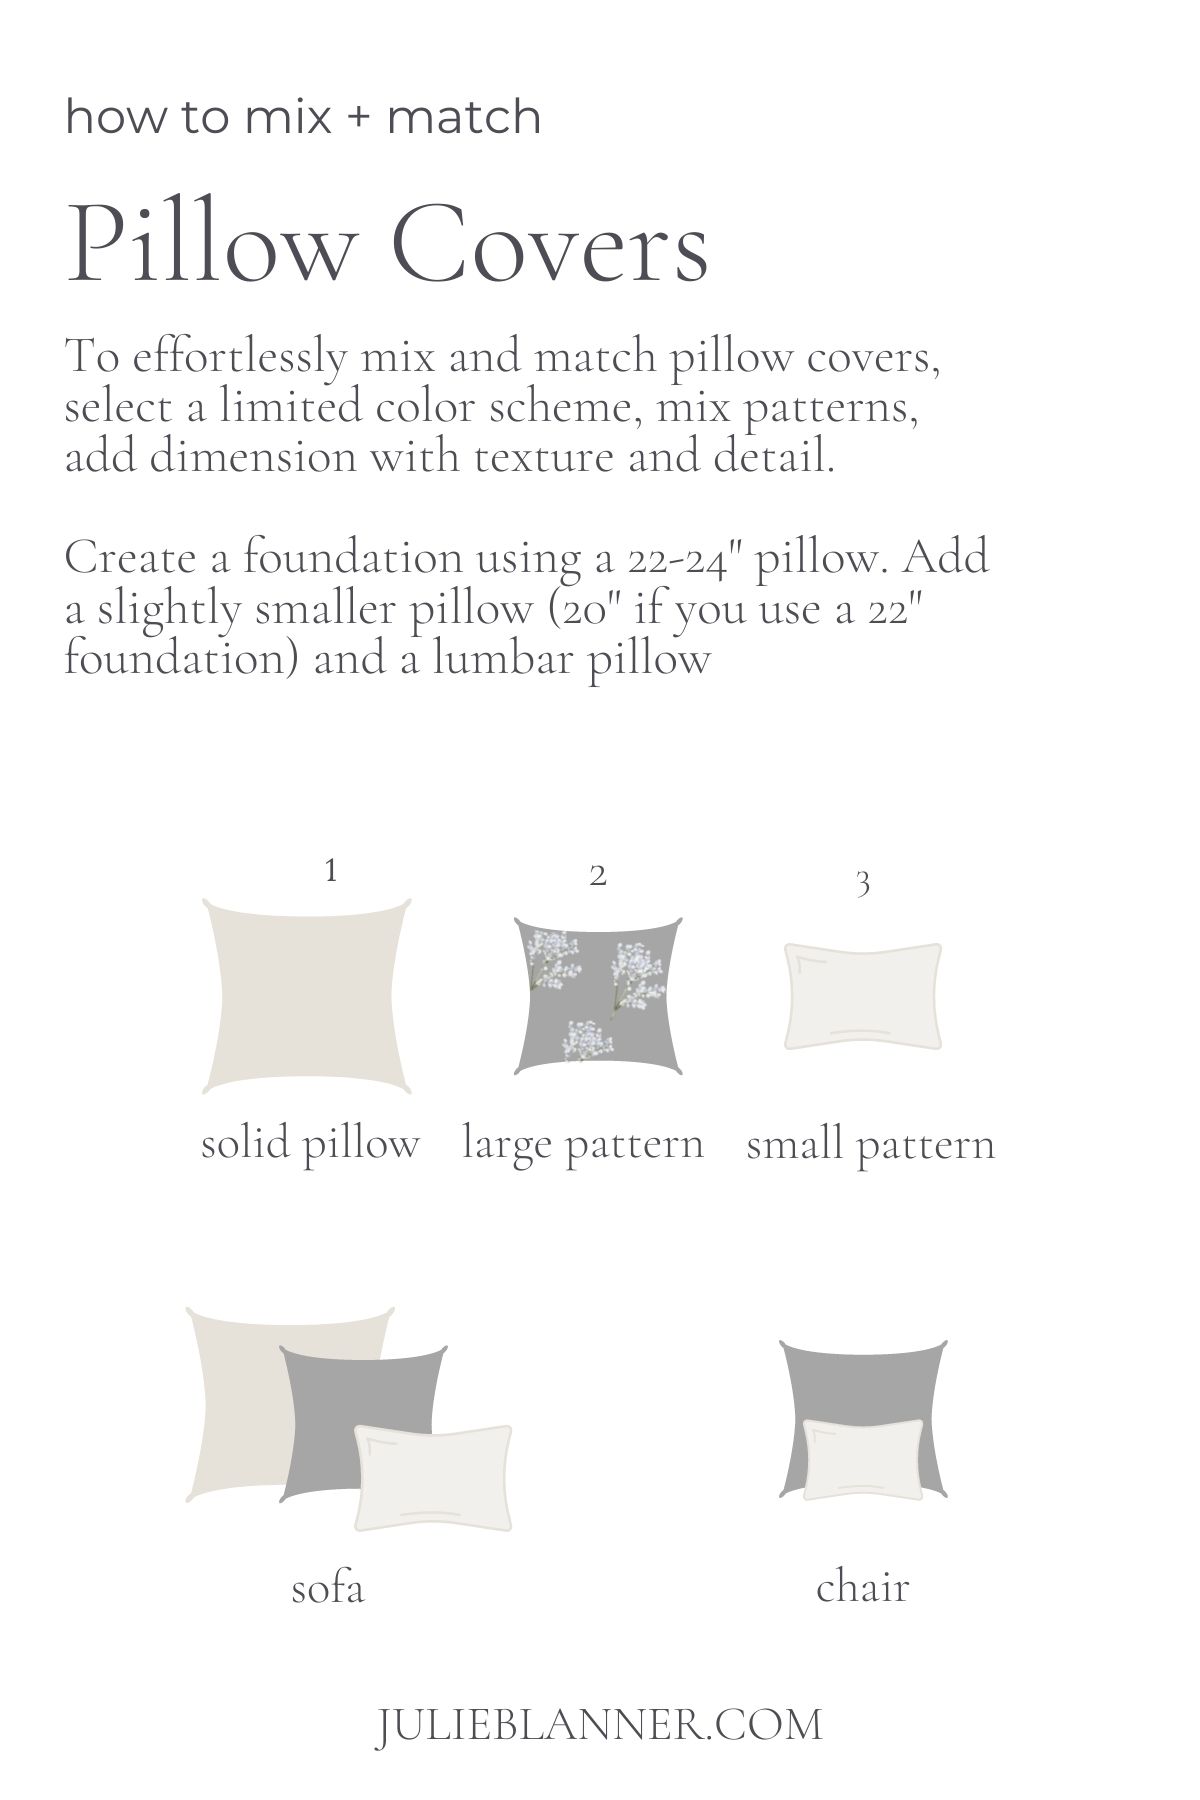 A graphic that showcases sizes and styles of pillow covers